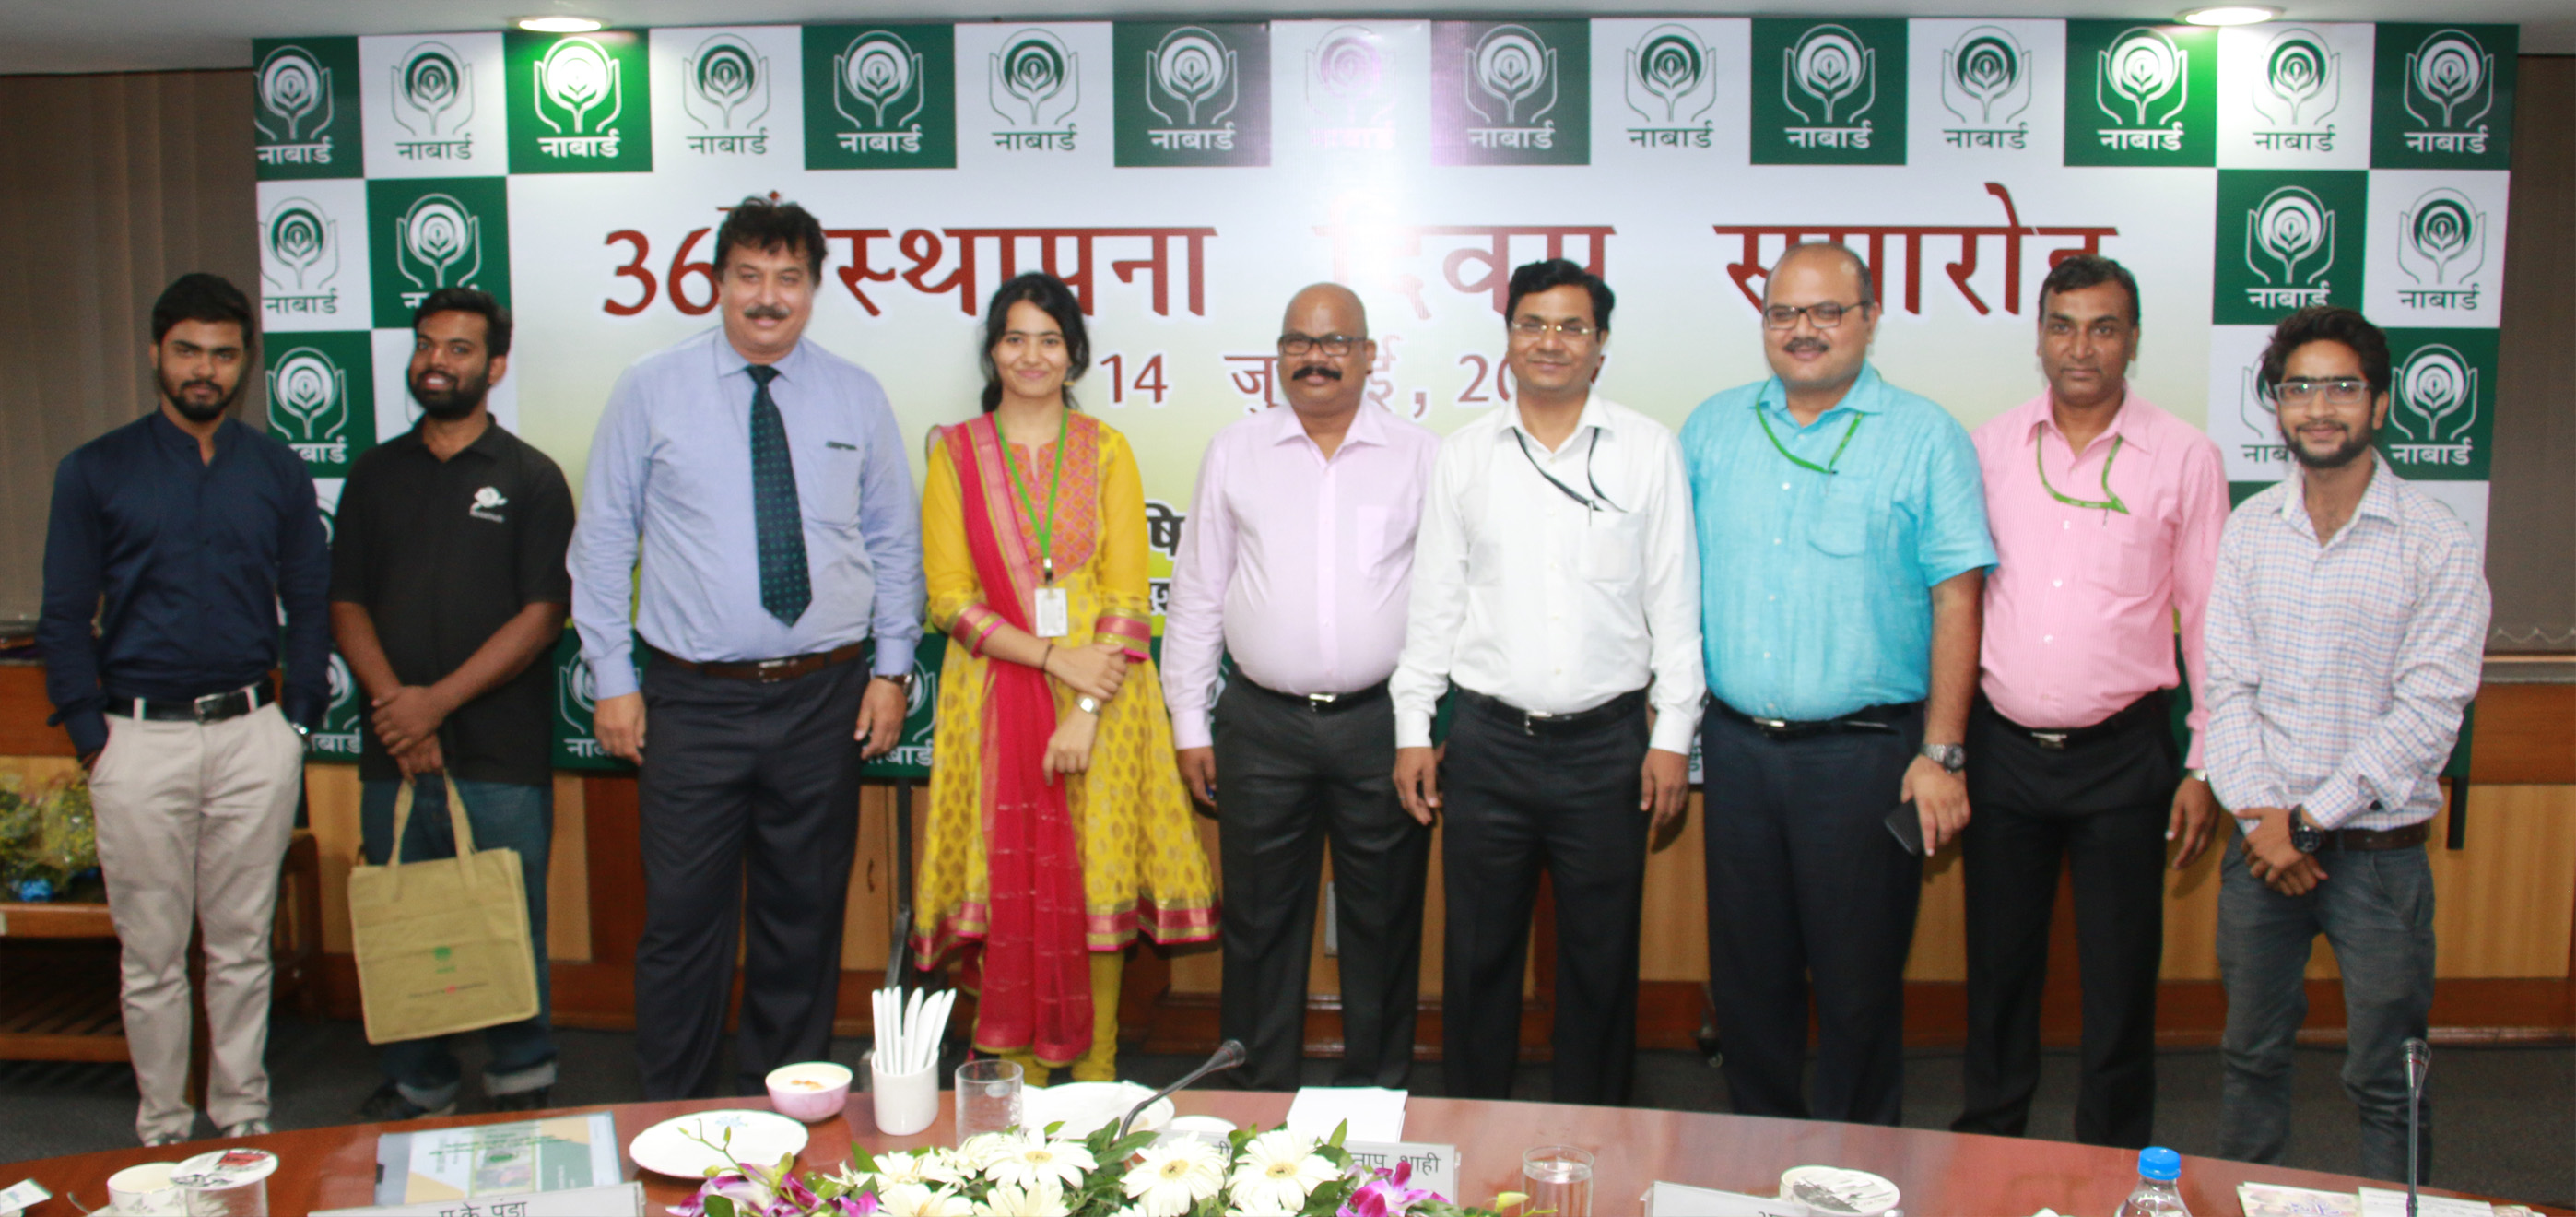 Team Rosehub with NABARD Lucknow Officals